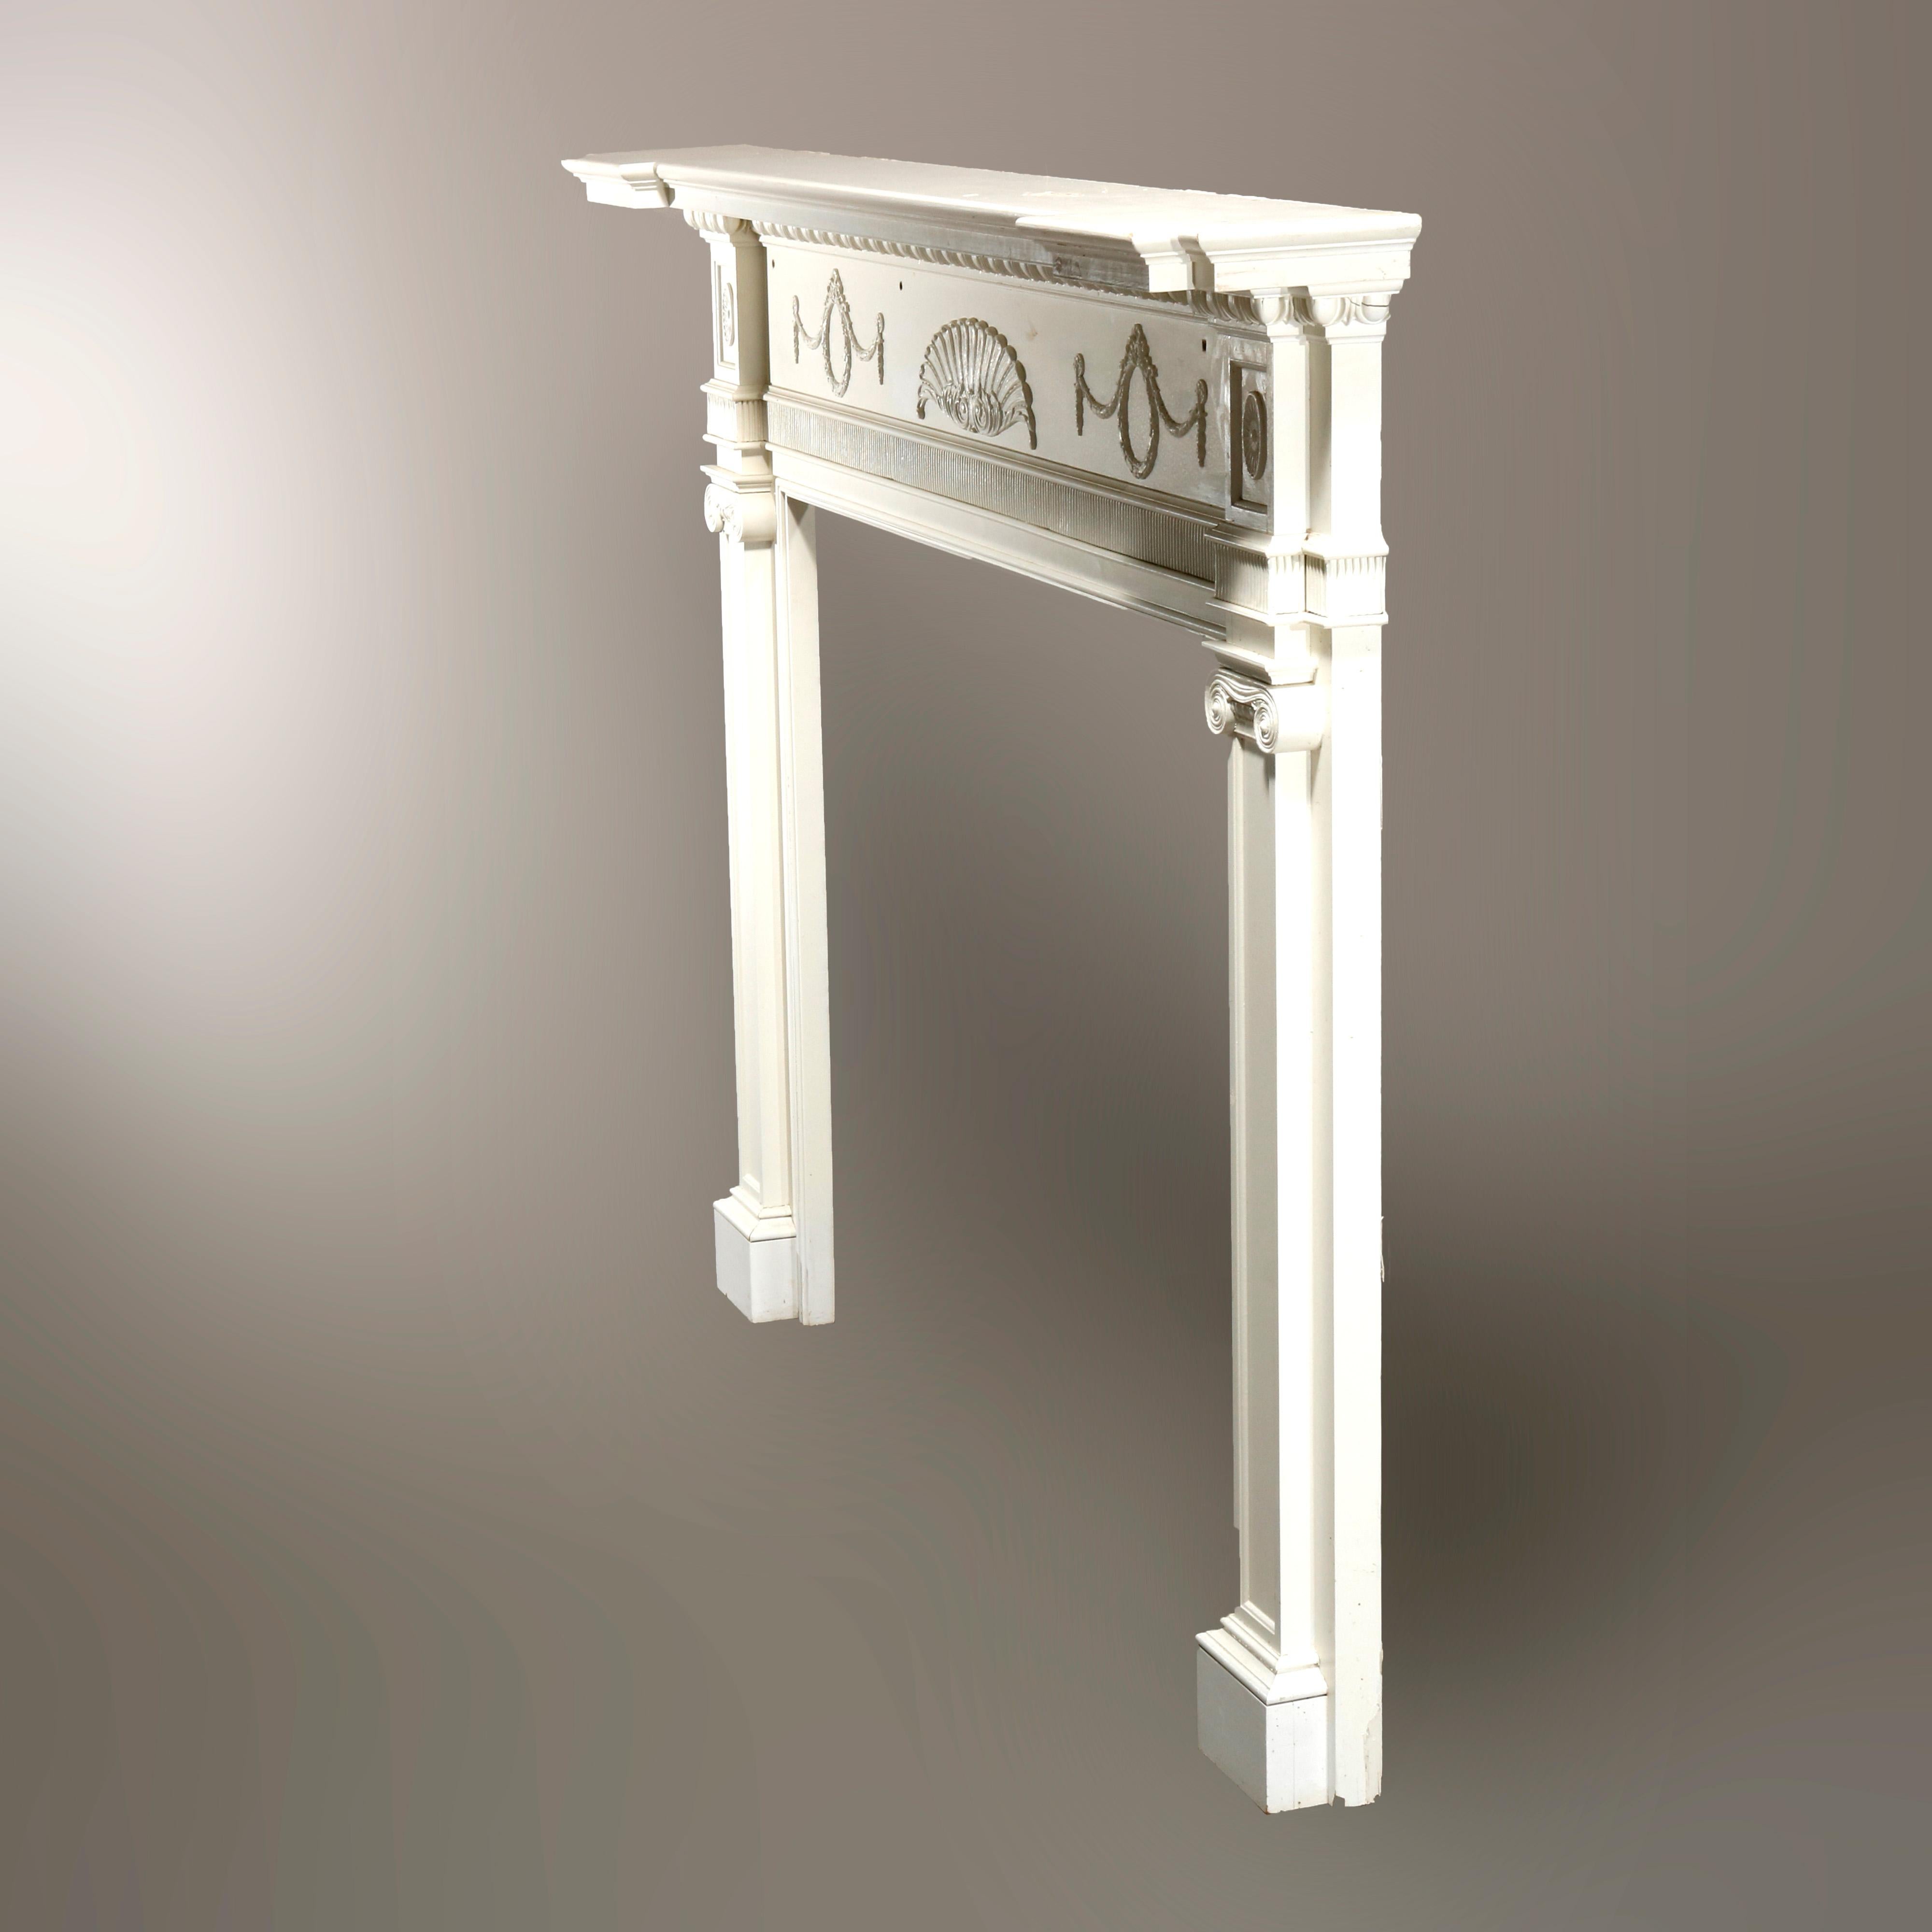 An antique neoclassical architectural fireplace mantle offers wood construction with frieze having applied repeating wreath and swag garland elements, carved egg-and-dart and reeded trim, with flanking Corinthian column supports, painted white, 20th